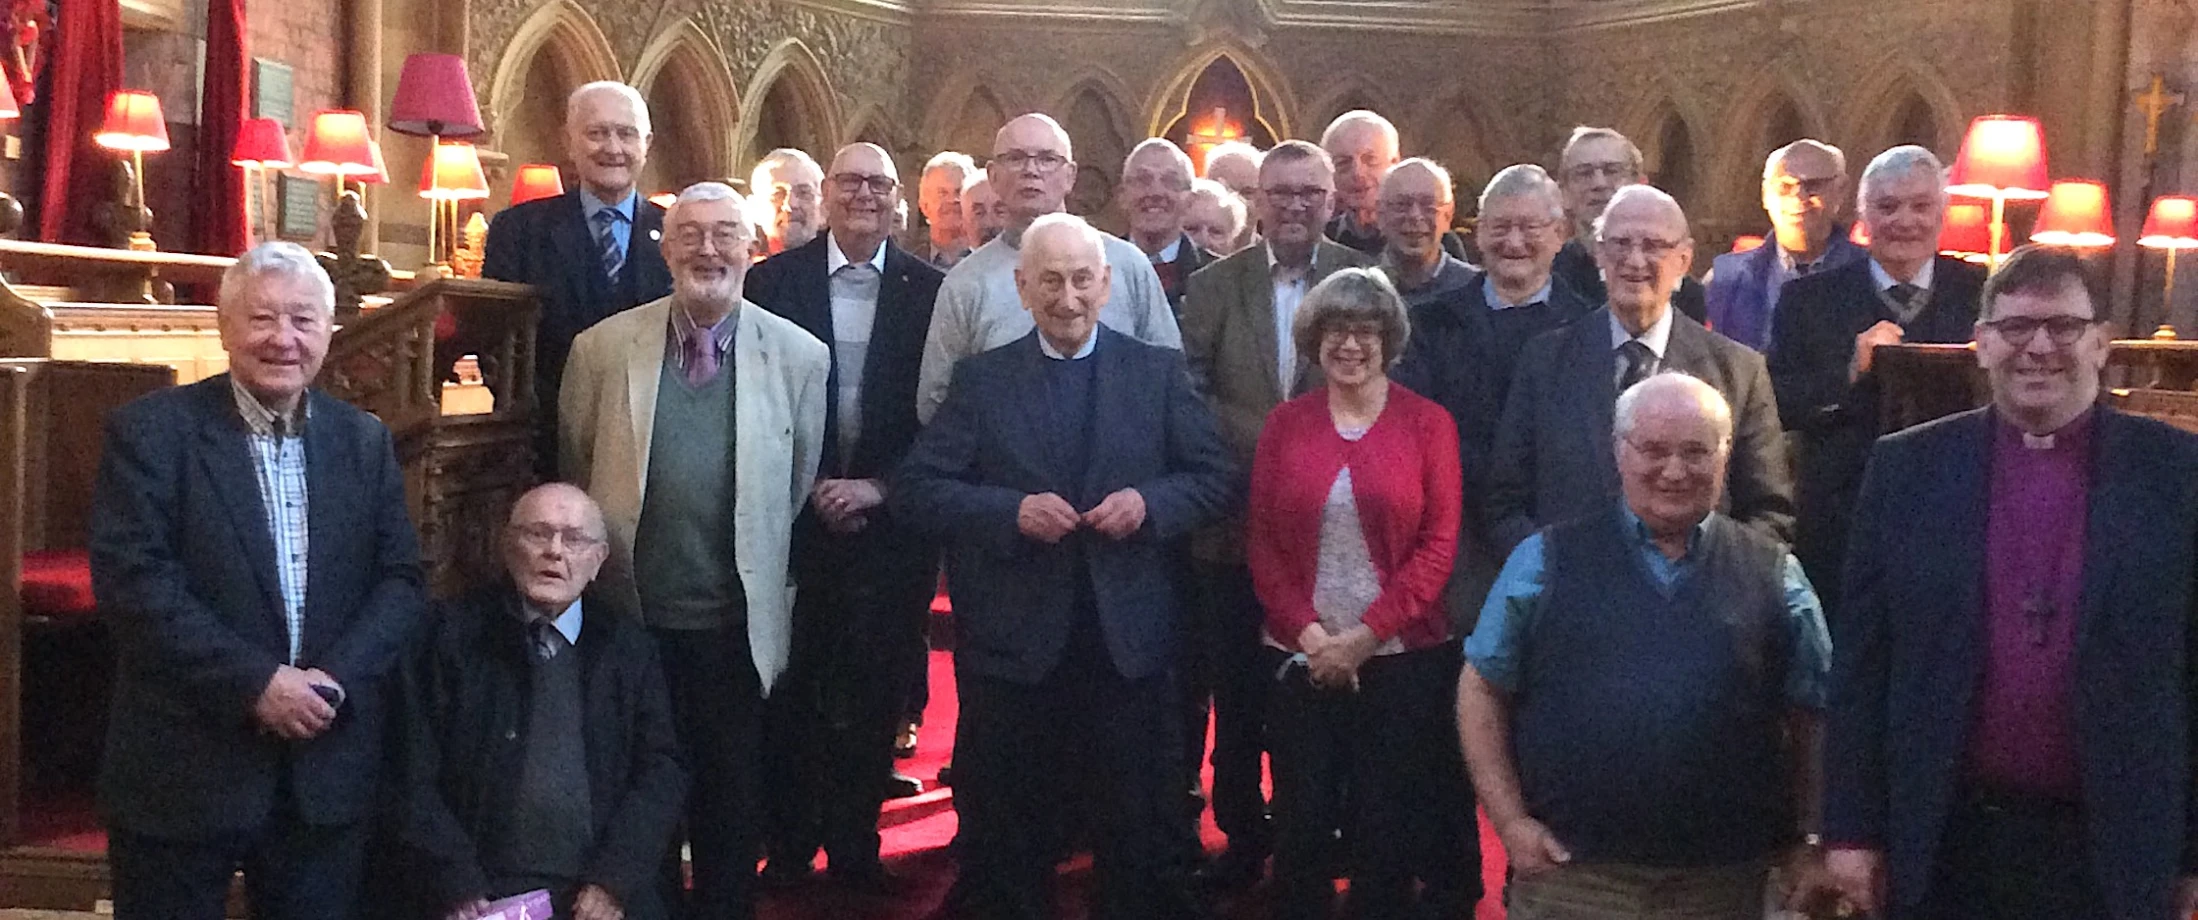 Retired Clergy Association meets again